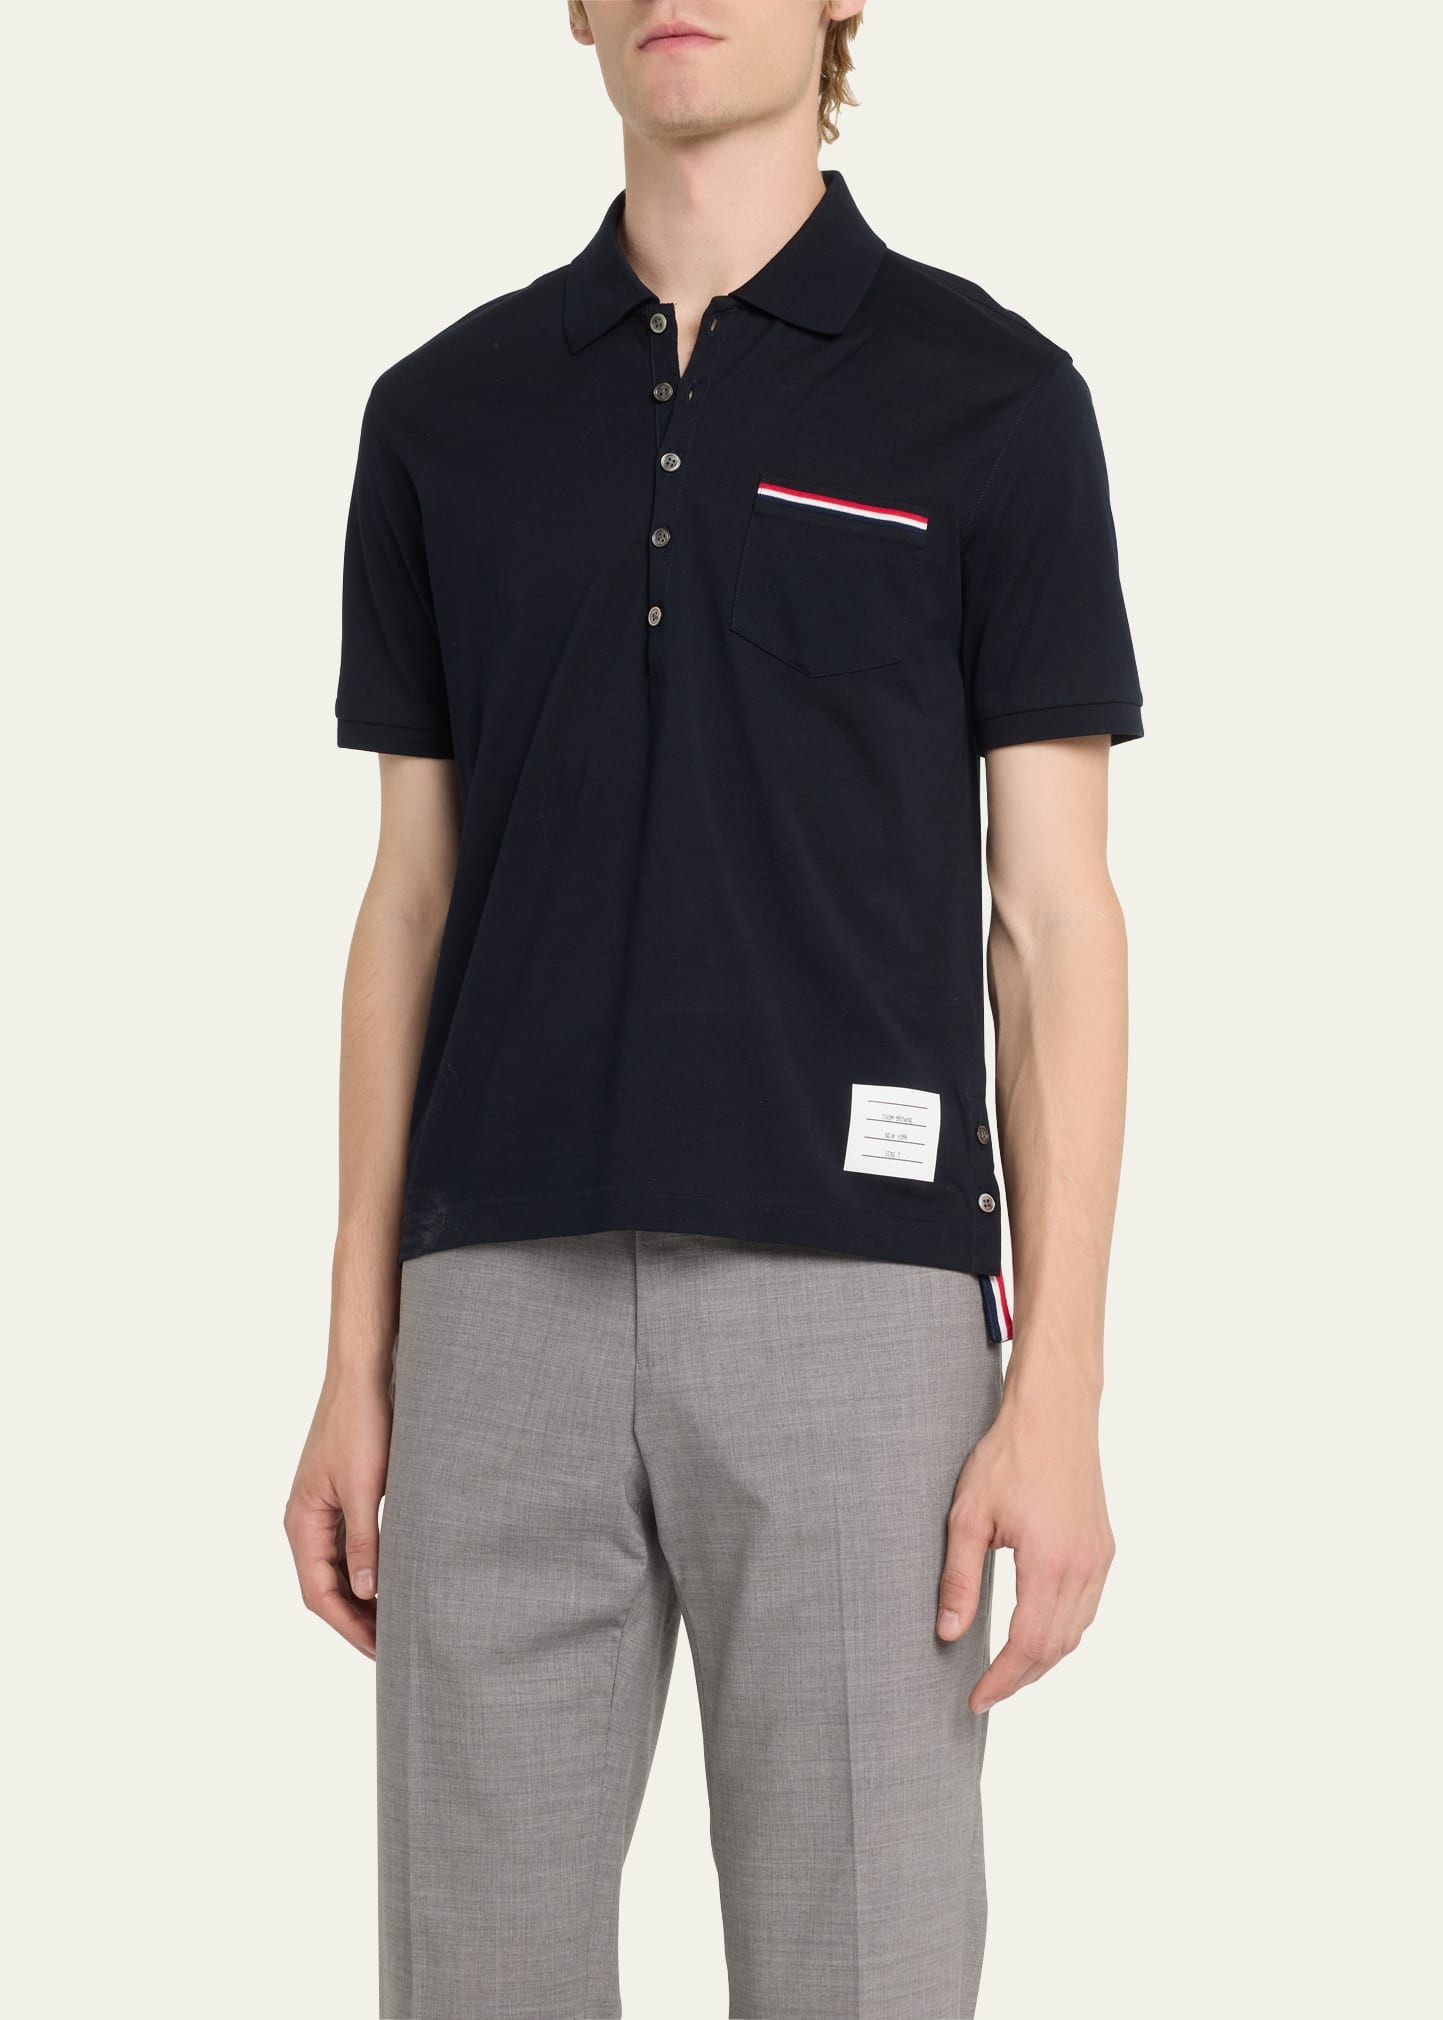 Heather Polo Shirt with Striped Pocket - 4